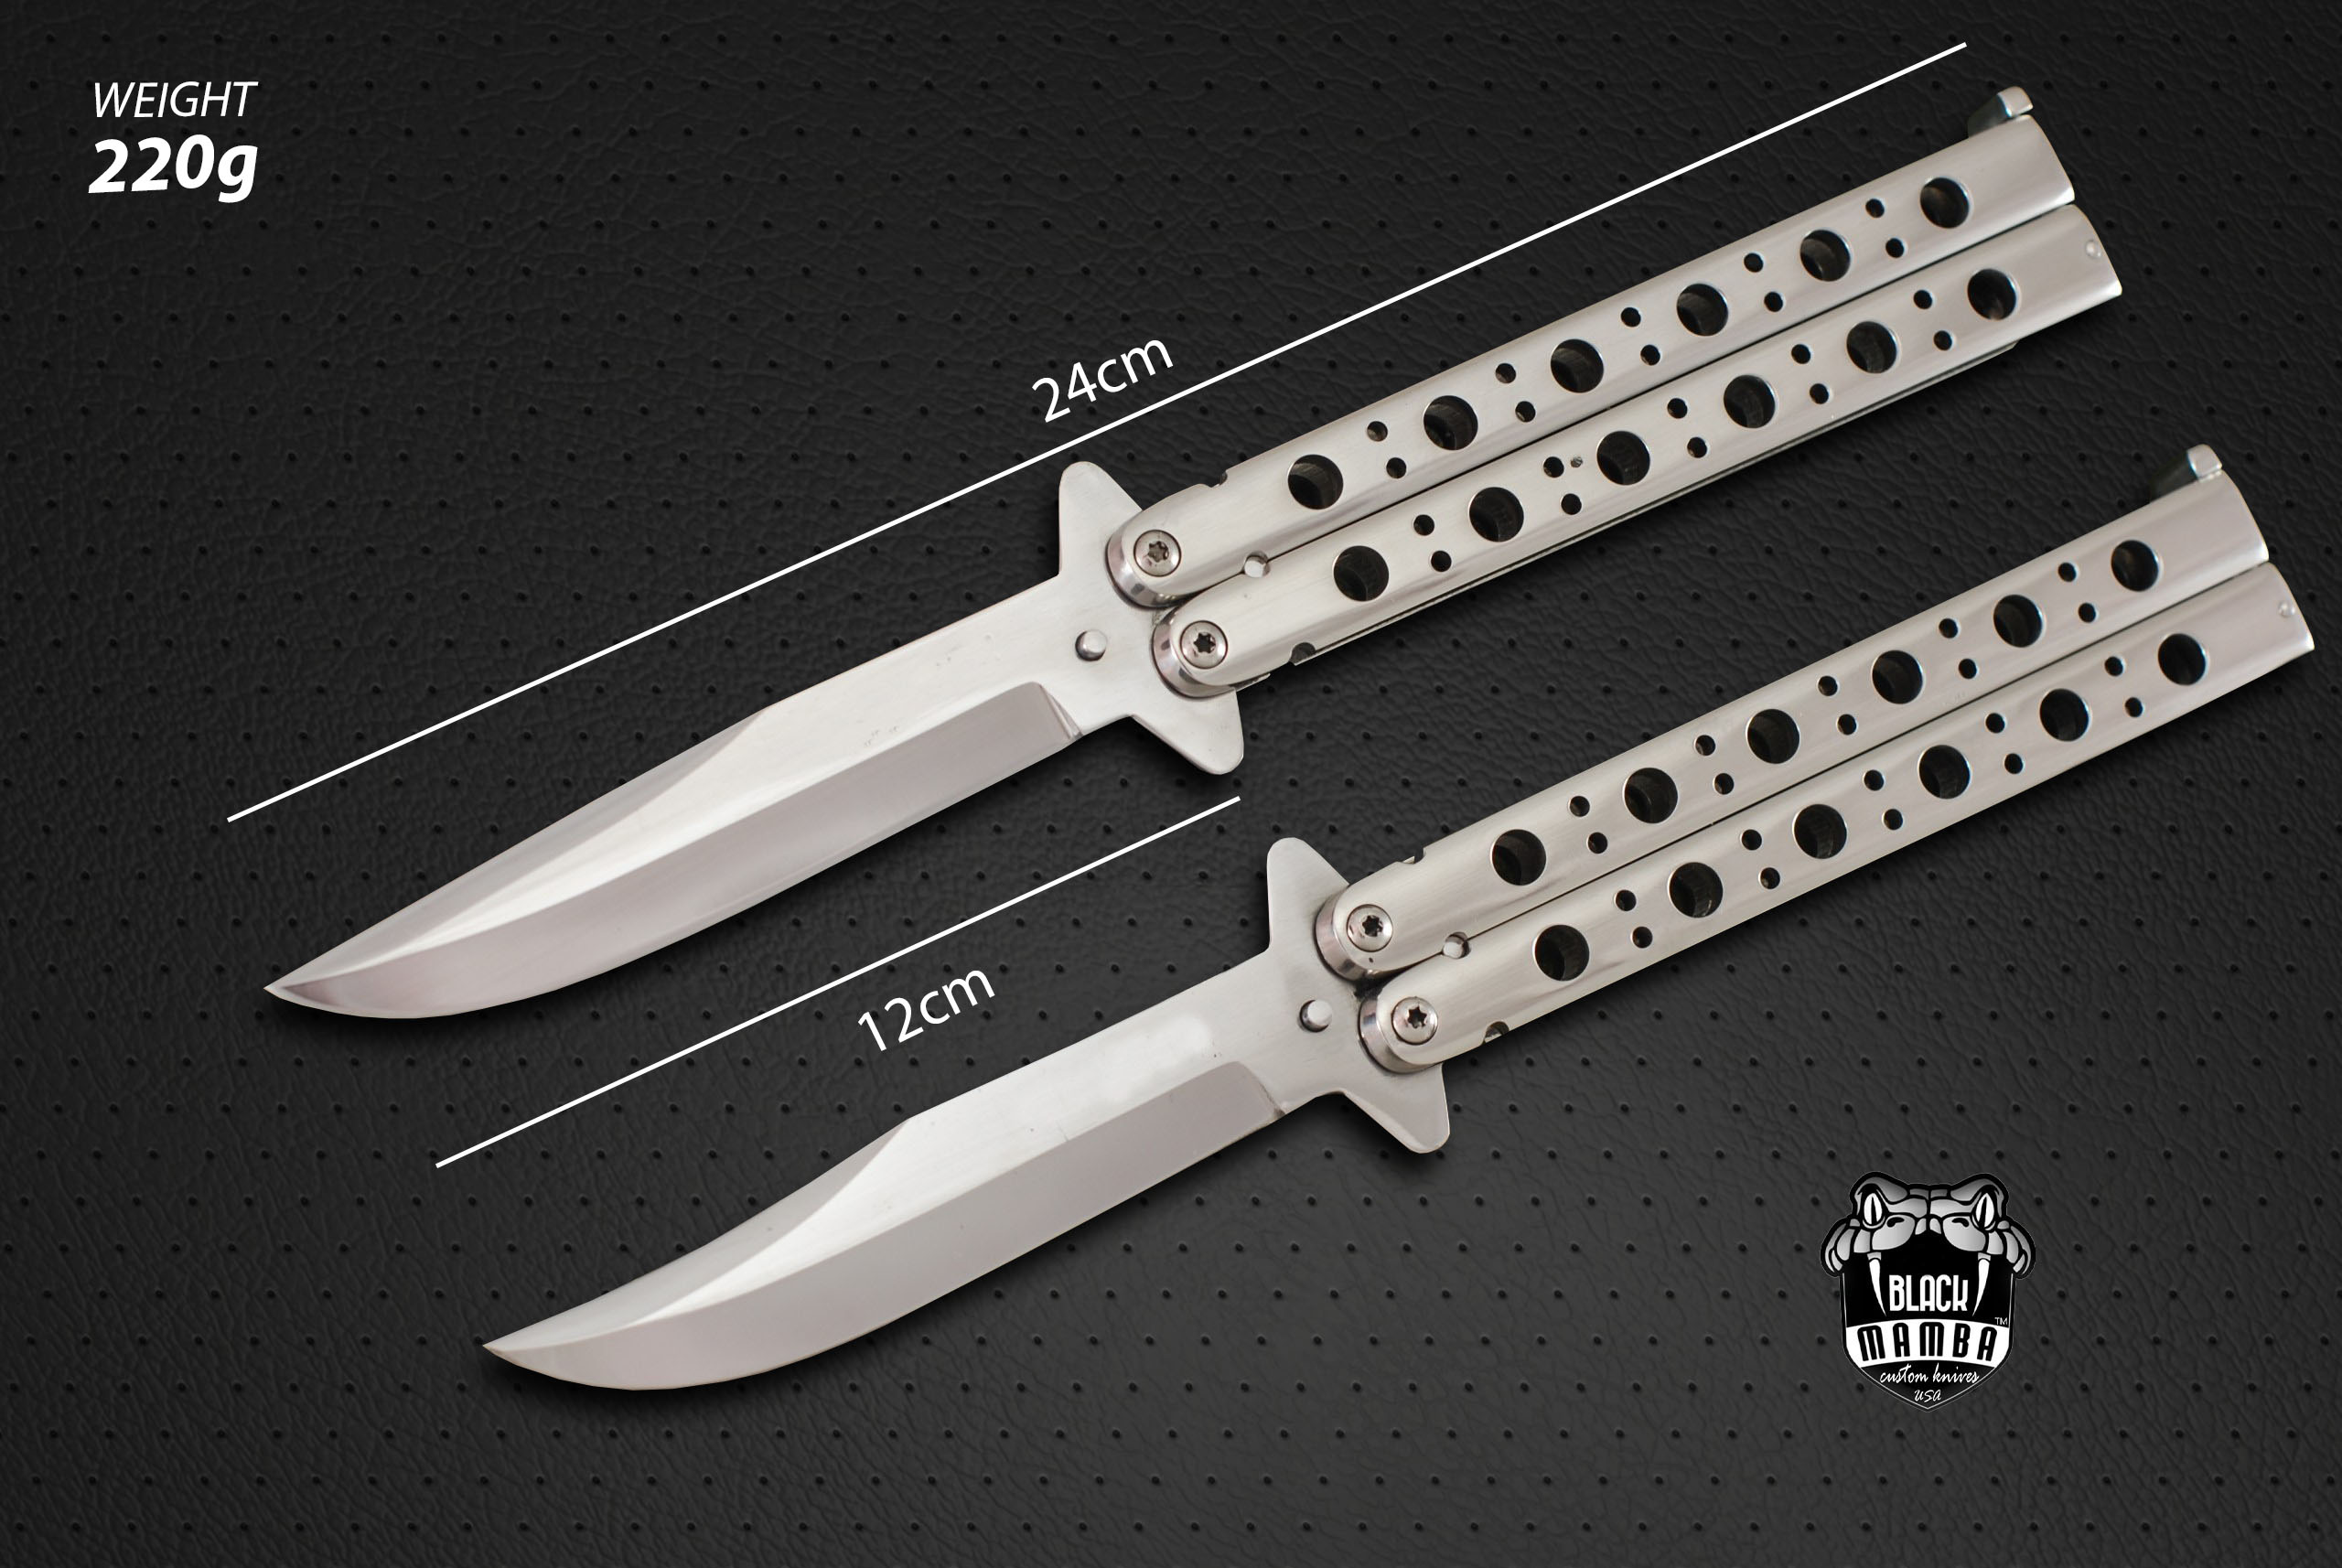 The Best Balisong Knives for Your Money - EKnives